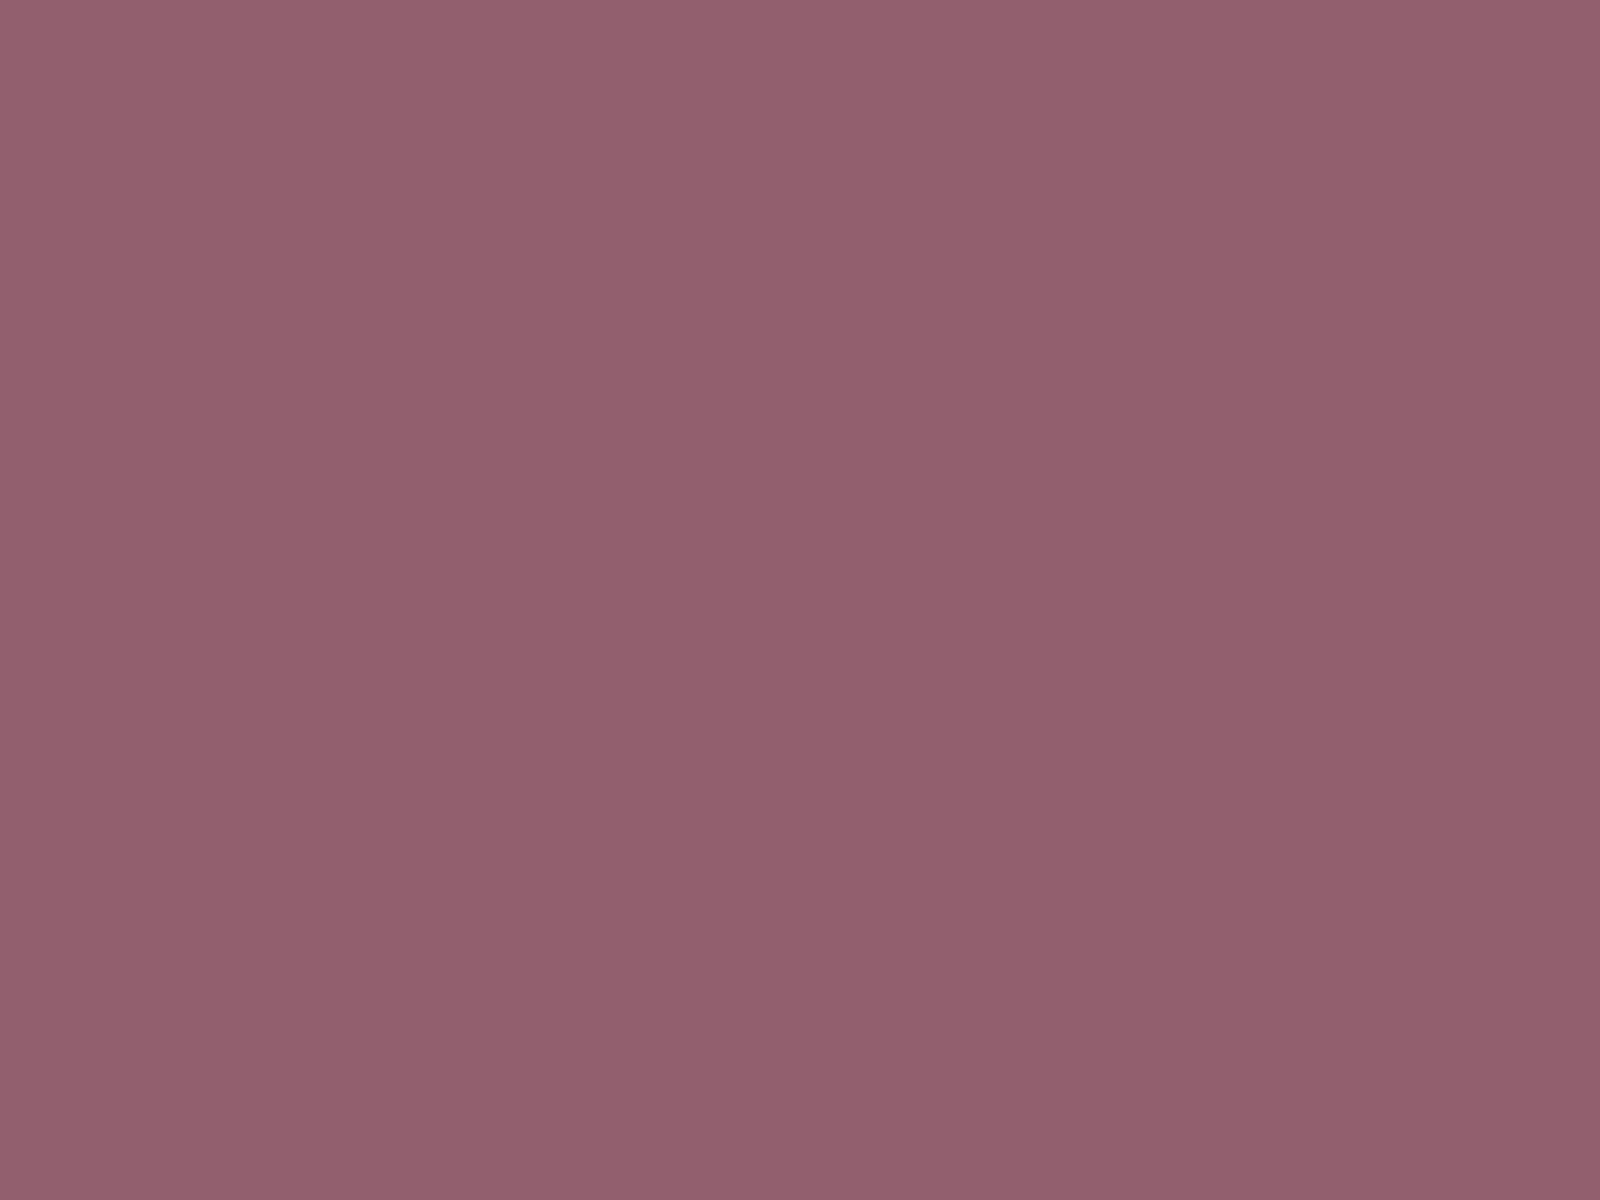 1600x1200 Mauve Taupe Solid Color Background